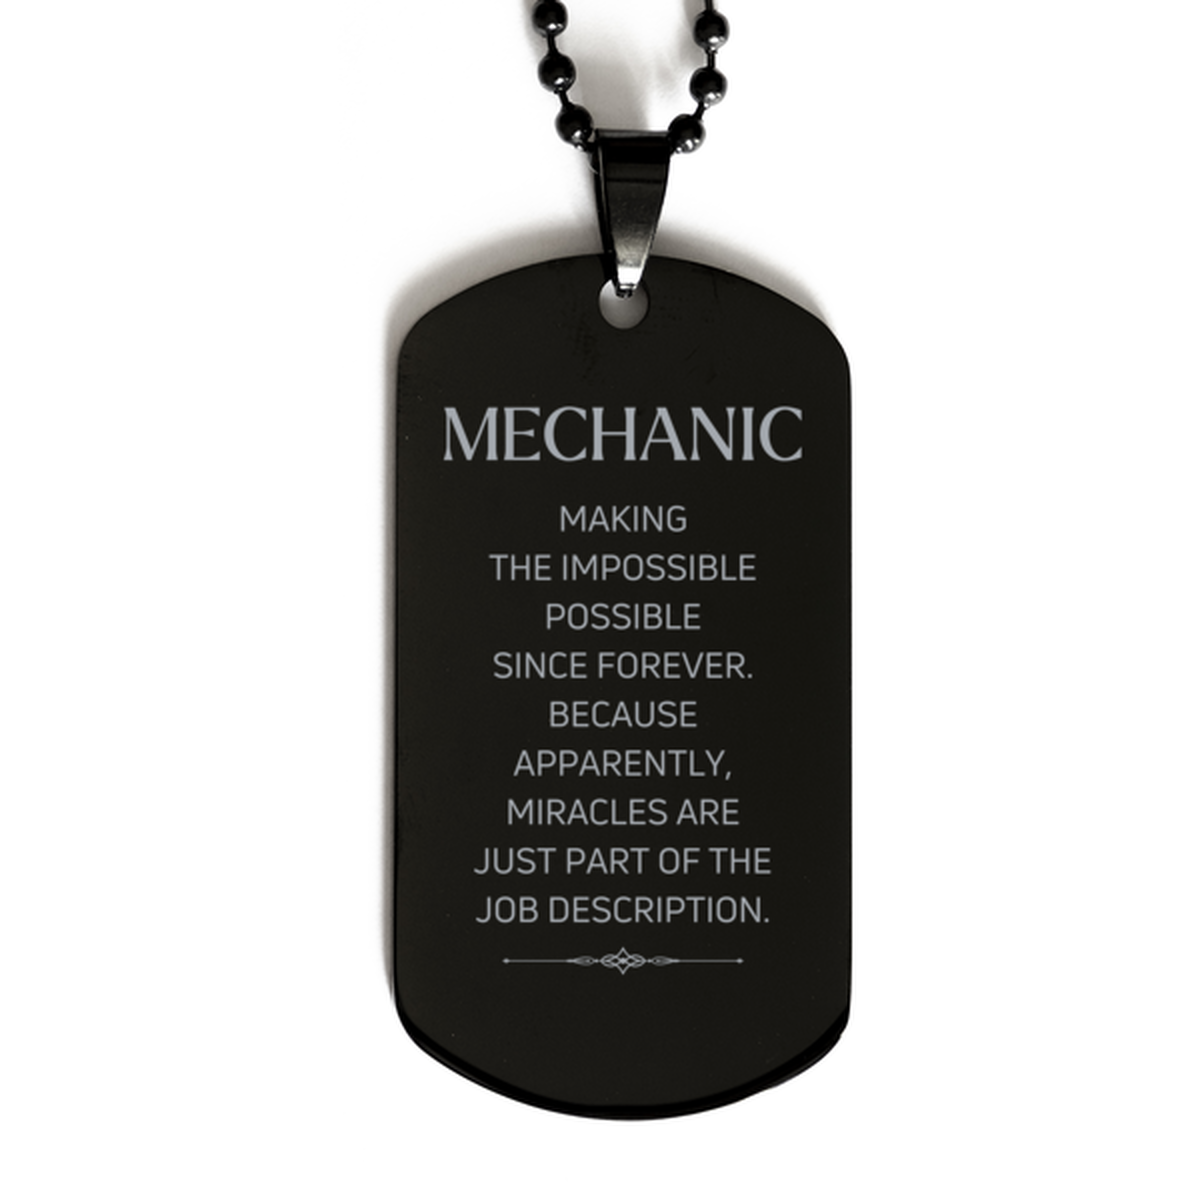 Funny Mechanic Gifts, Miracles are just part of the job description, Inspirational Birthday Black Dog Tag For Mechanic, Men, Women, Coworkers, Friends, Boss